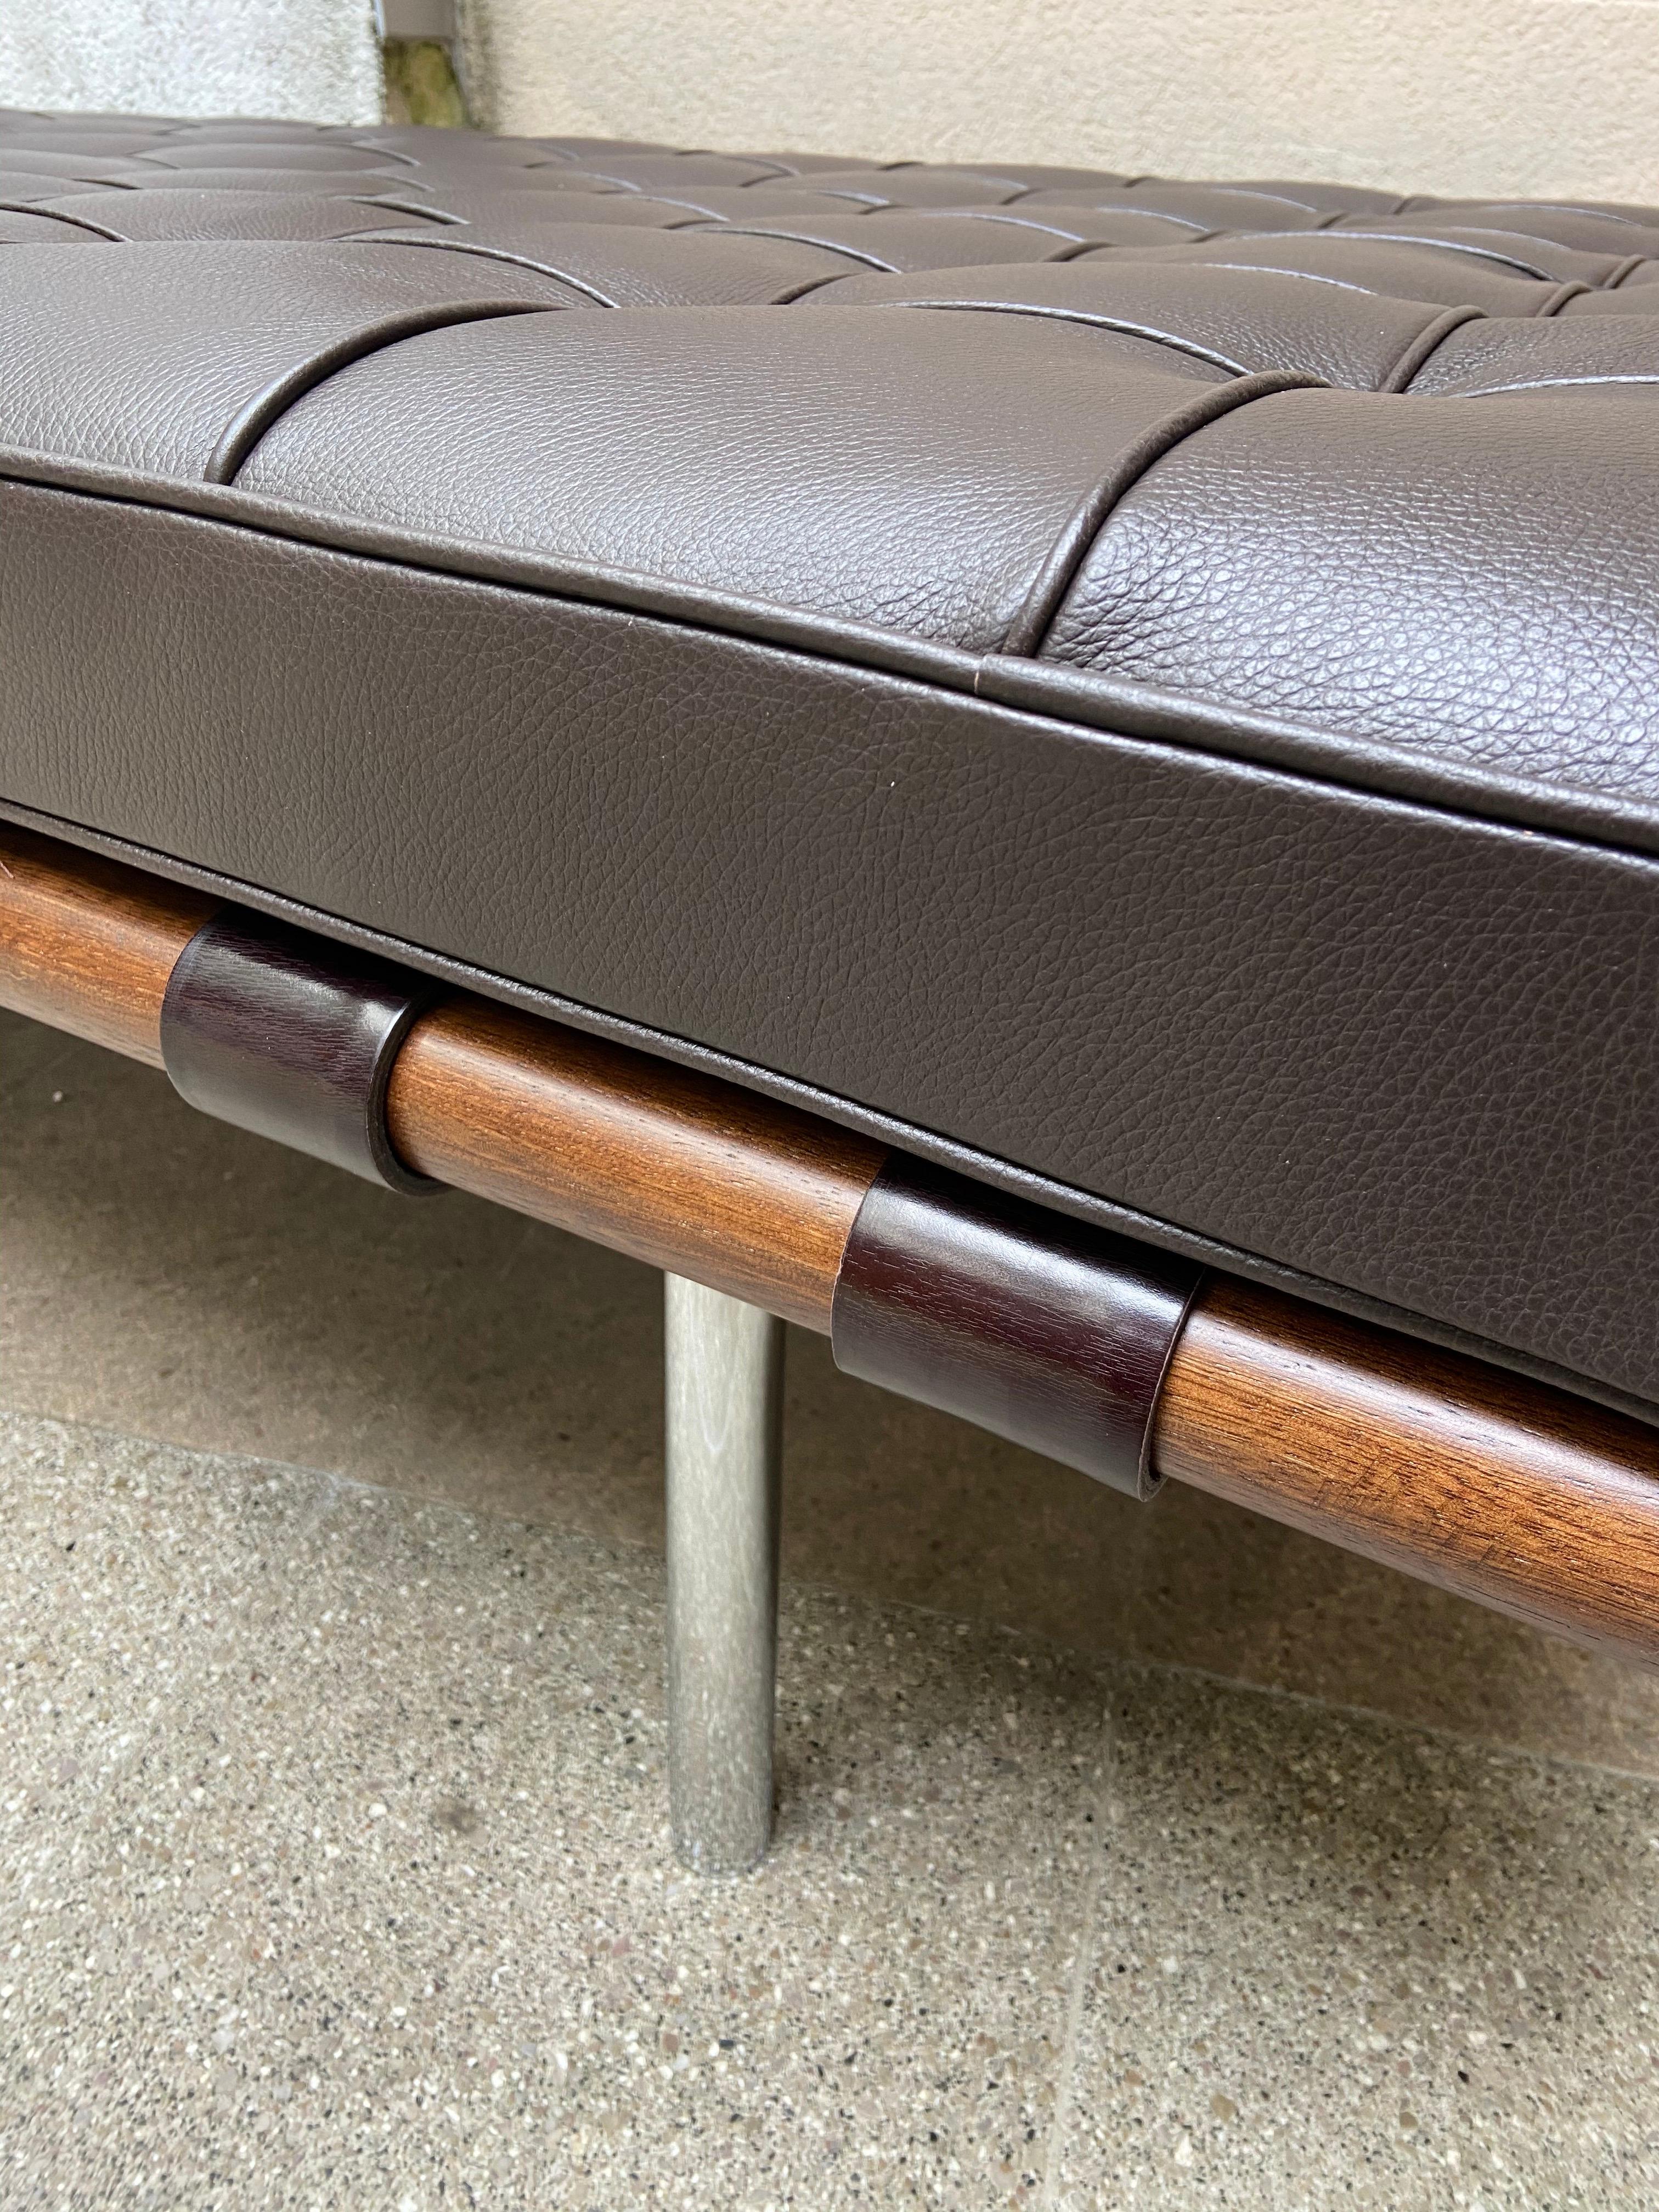 Mies van der Rohe - Barcelona daybed dark brown
Knoll edition,
circa 2017
Brown leather and ashwood
Dimensions: Height 65 cm, large 98, long 196 cm
In a perfect state
With certificate.